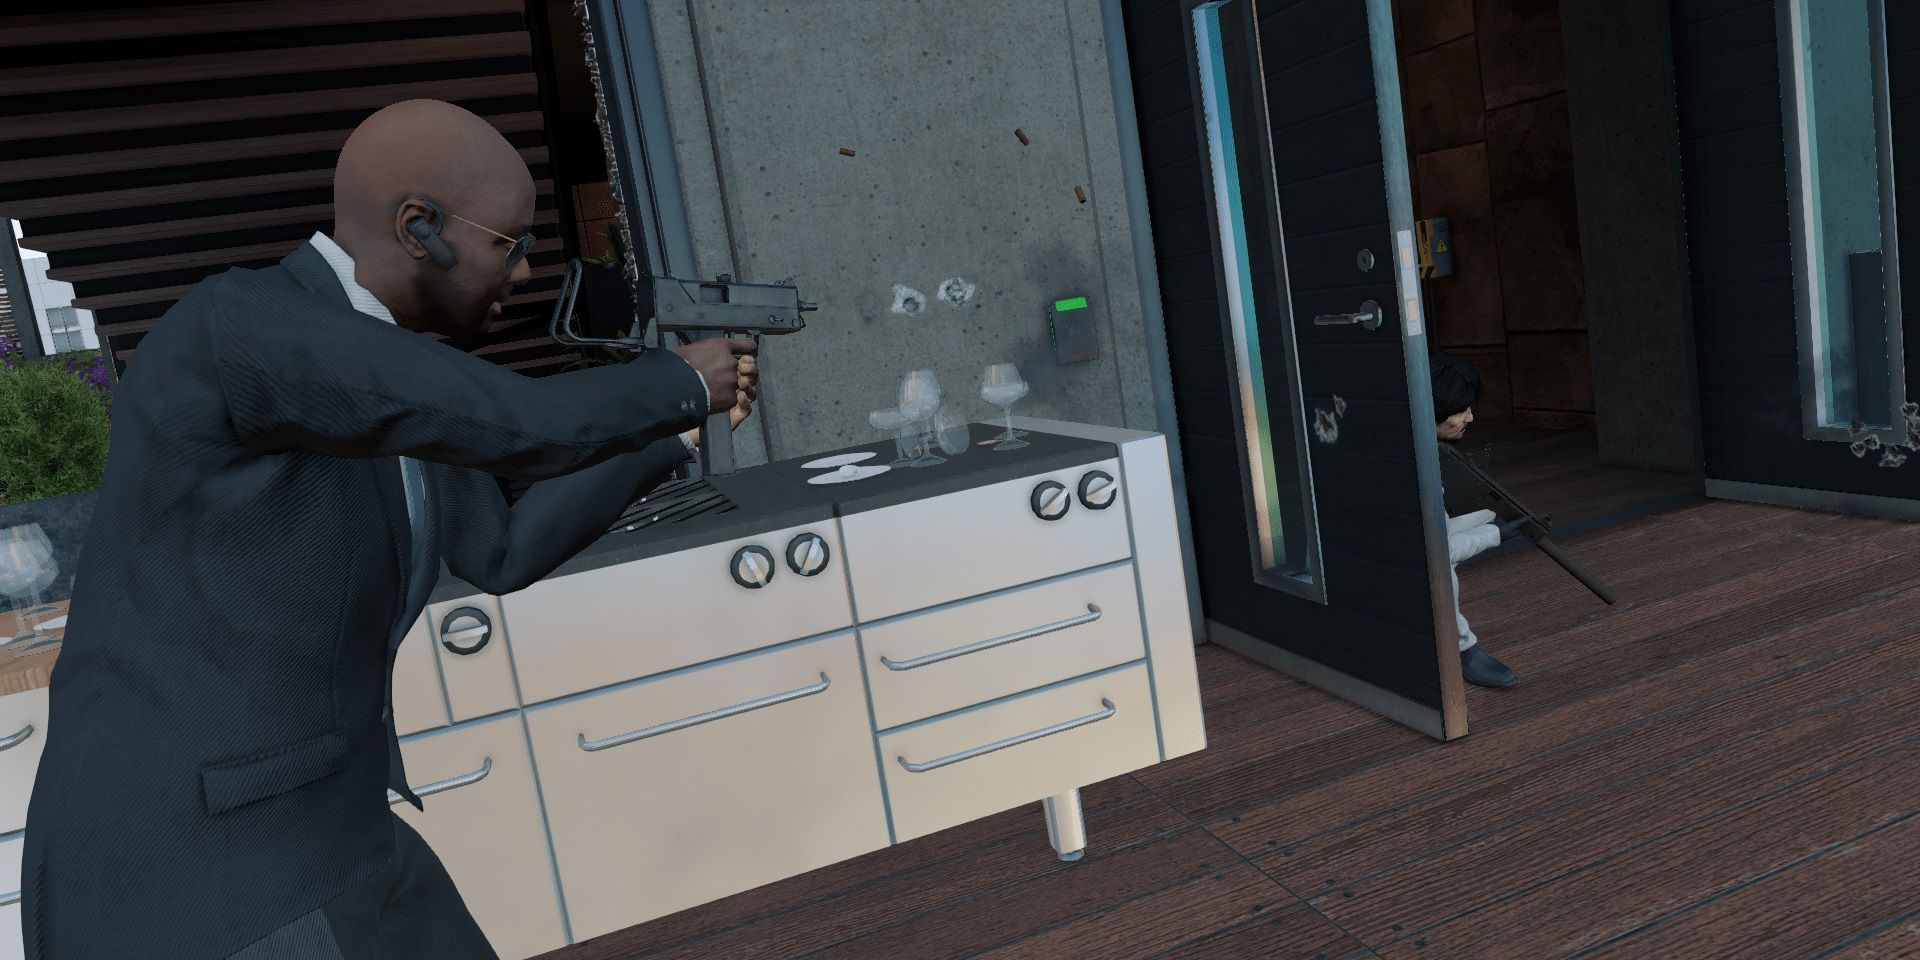 Watch Dogs 2 character engaged in gunfight in a kitchen